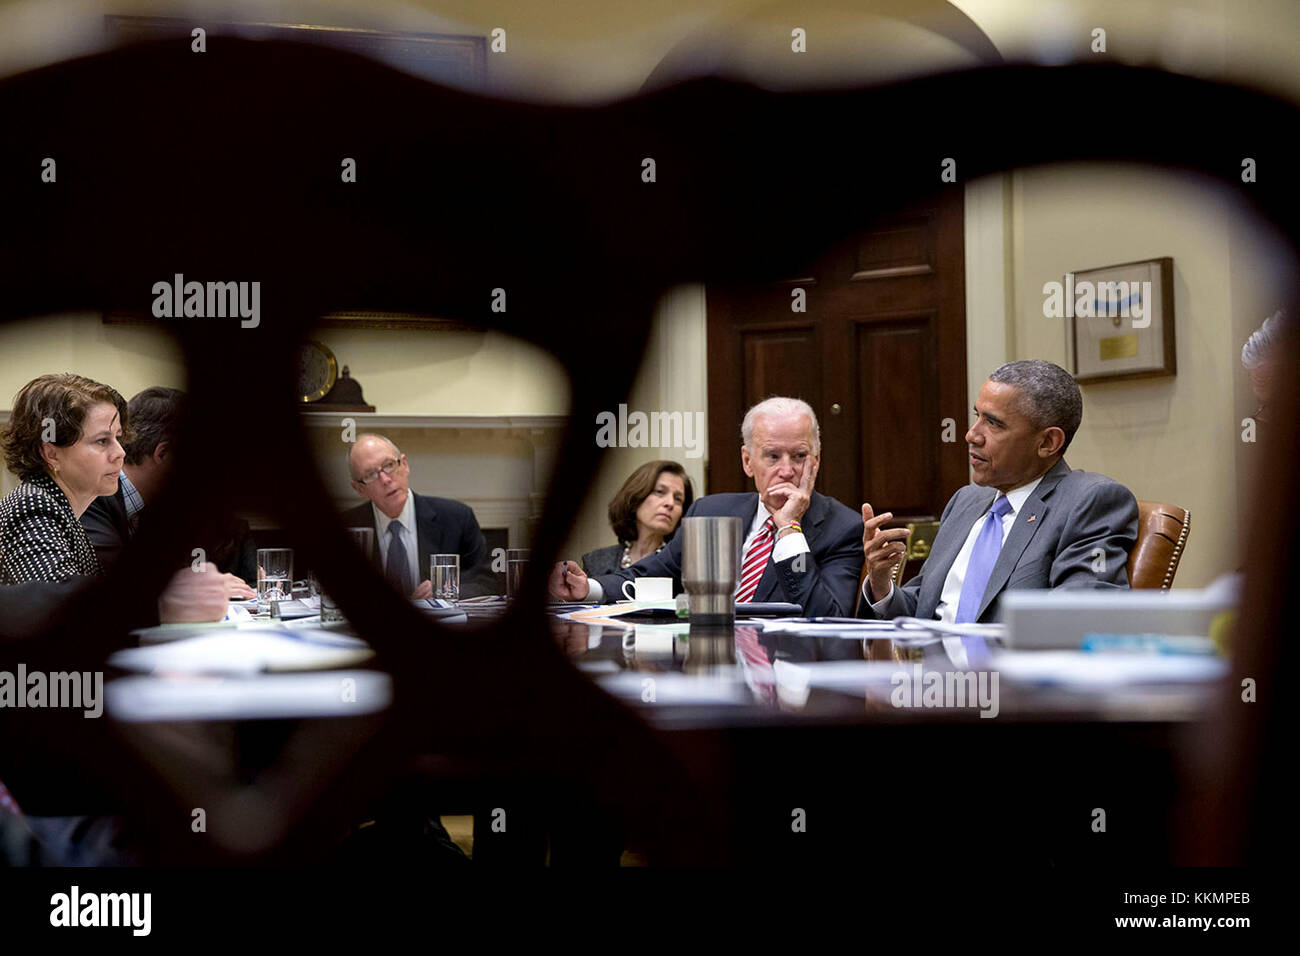 President Barack Obama convenes a meeting with Vice President Joe Biden on college ratings in the Roosevelt Room of the White House, April 1, 2015. Seated with them from left are Cecilia Muñoz, Domestic Policy Council Director; James Kvaal, Domestic Policy Council Deputy Director; Education Undersecretary Ted Mitchell and Treasury Deputy Secretary Sarah Bloom Raskin. (Official White House Photo by Pete Souza)  This official White House photograph is being made available only for publication by news organizations and/or for personal use printing by the subject(s) of the photograph. The photogra Stock Photo